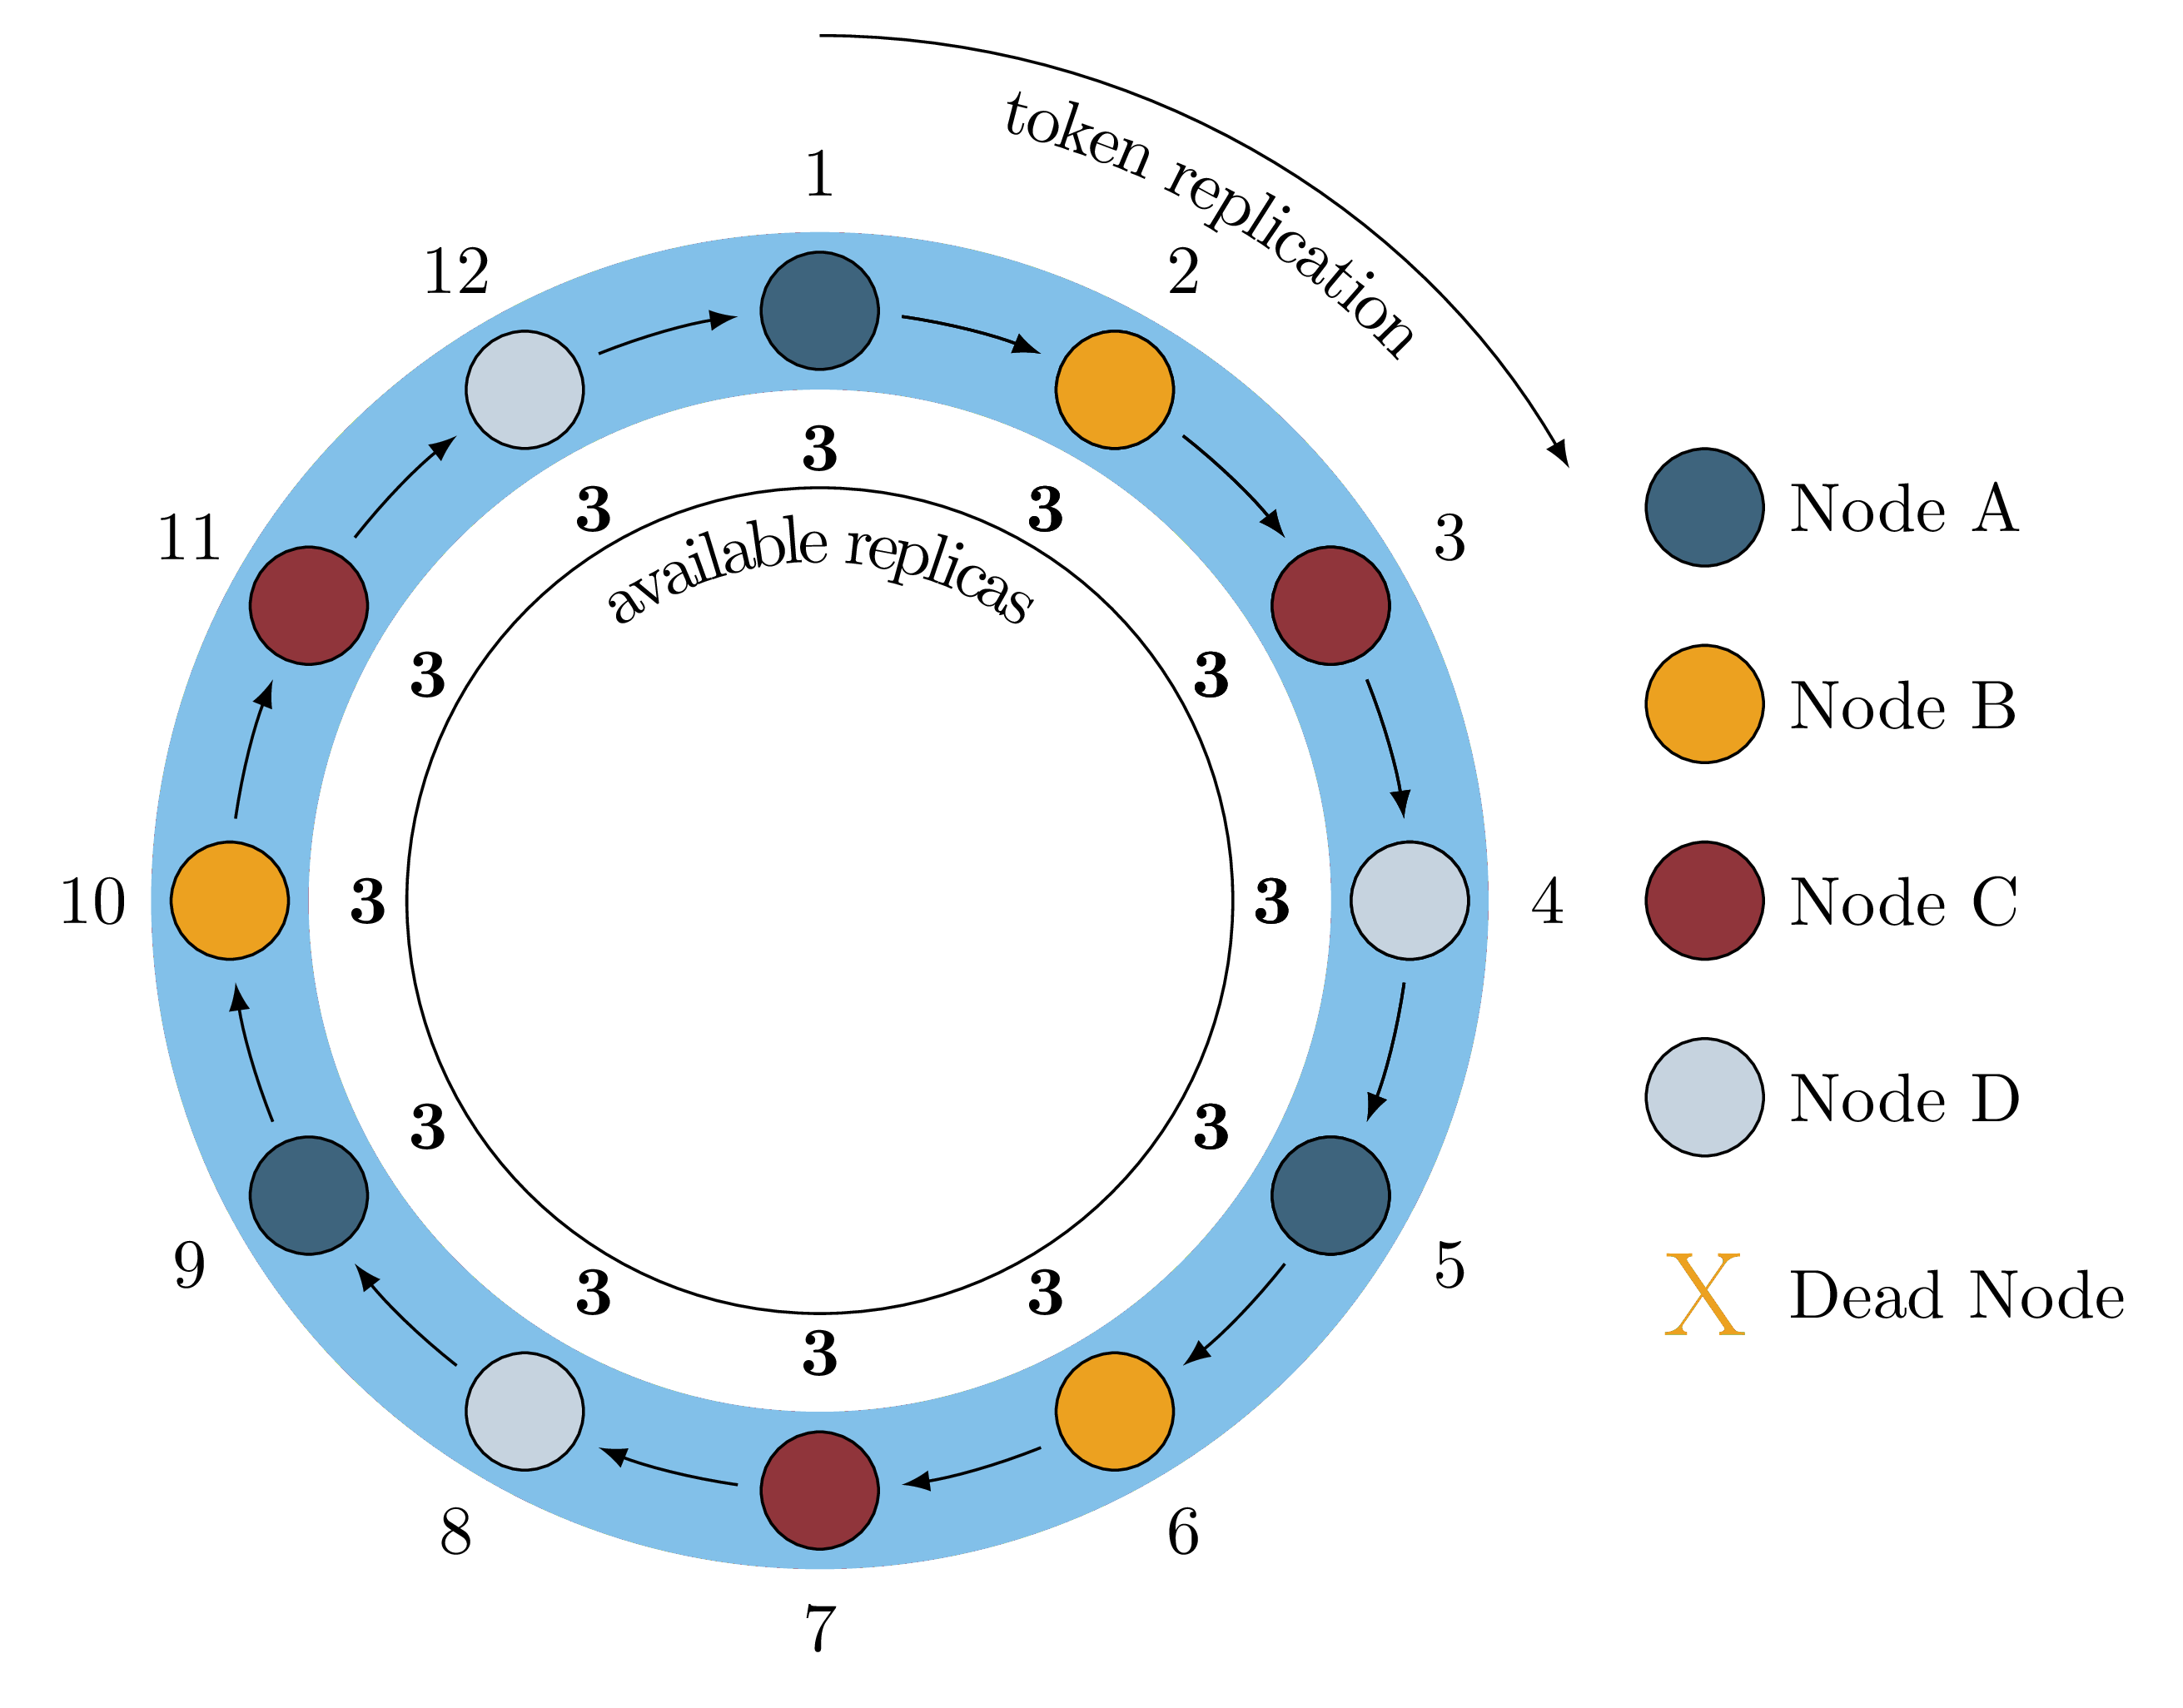 Figure 1: A Healthy Ring